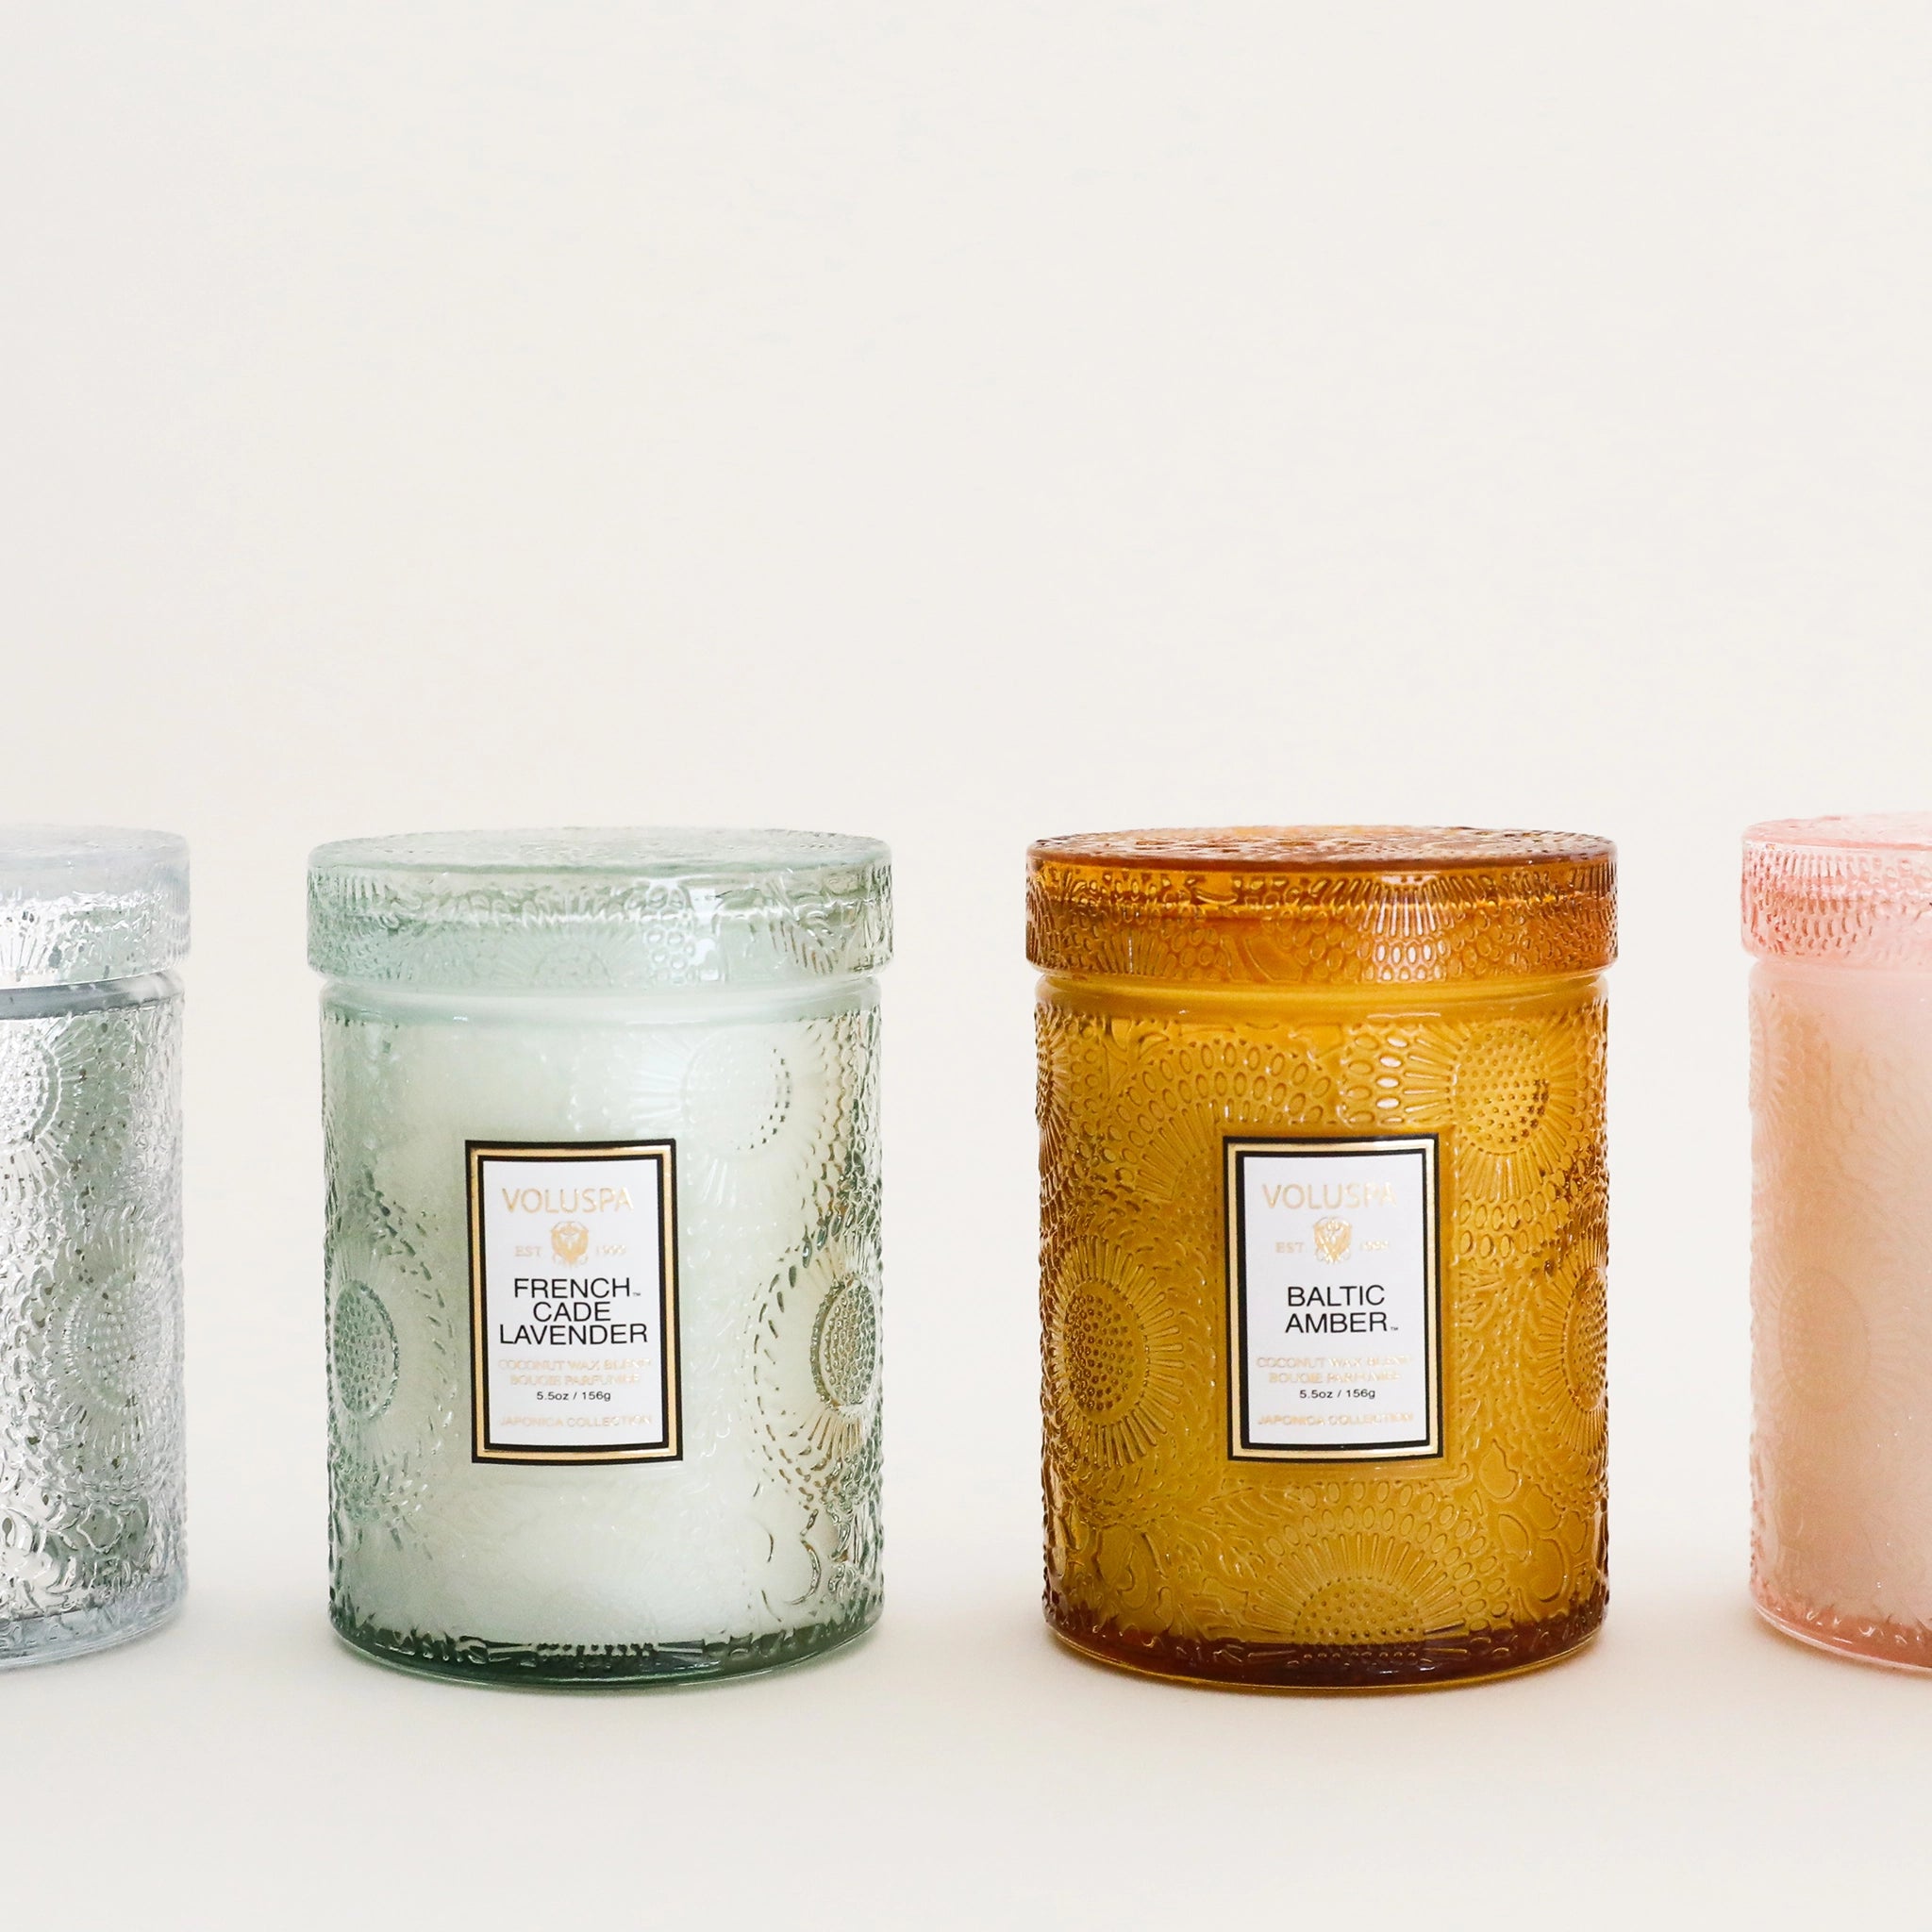 A light green decorative glass jar candle with a white rectangular label that reads, "French Cade Lavender" next to other scents by this brand that our store sells, like Baltic Amber which comes in a burnt orange glass jar.